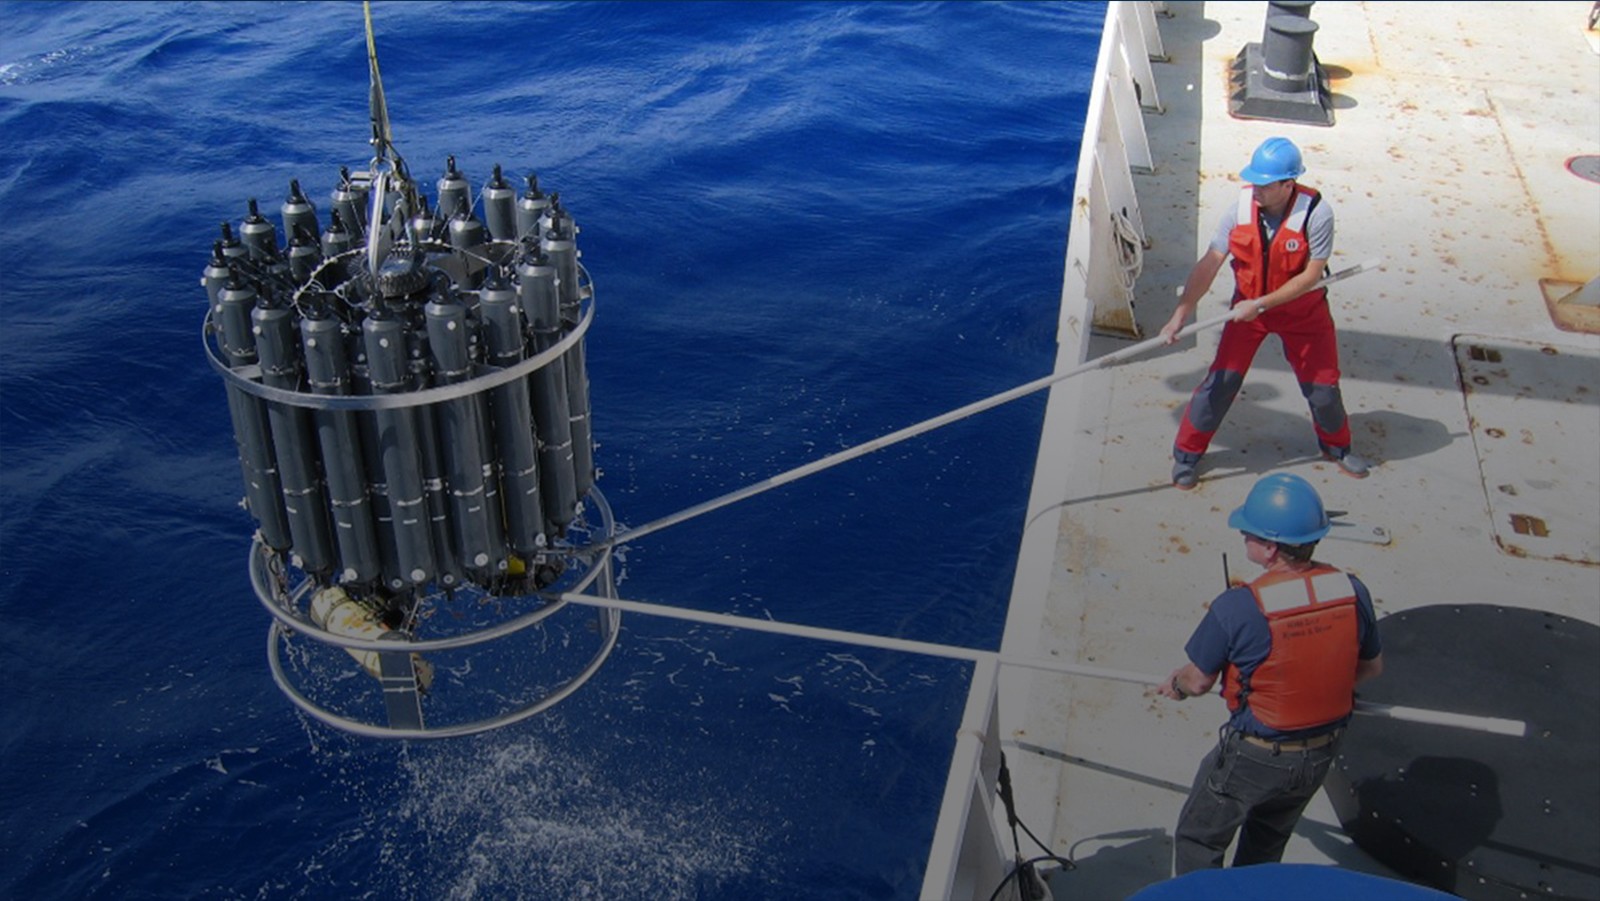 Two NOAA scientists deploy a large CTD into the ocean.